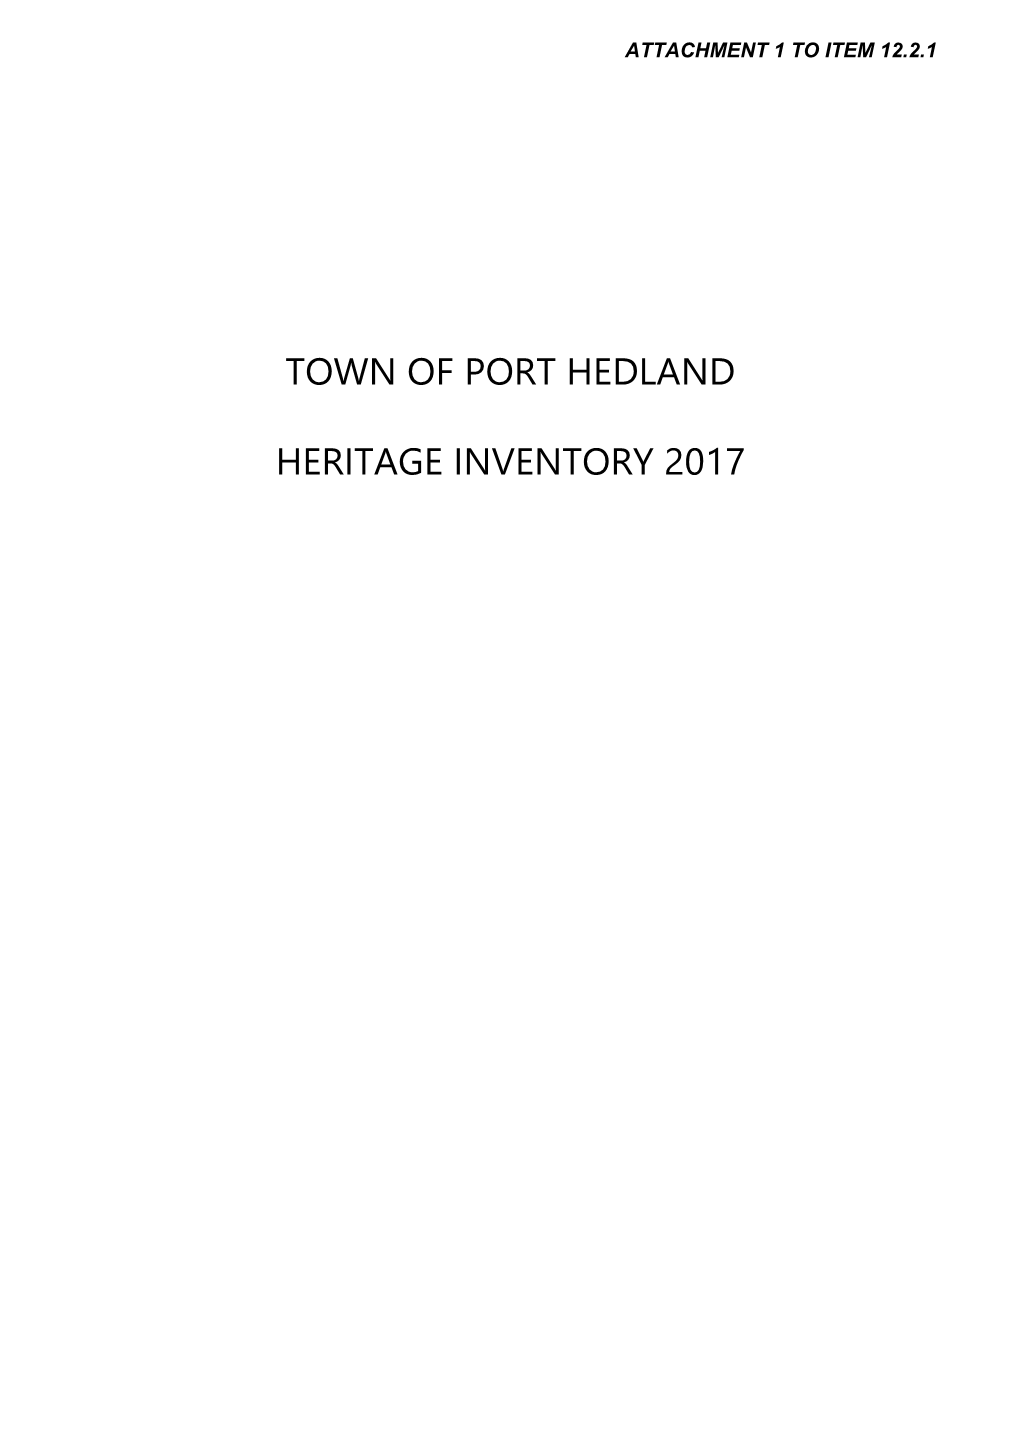 Town of Port Hedland Heritage Inventory 2017